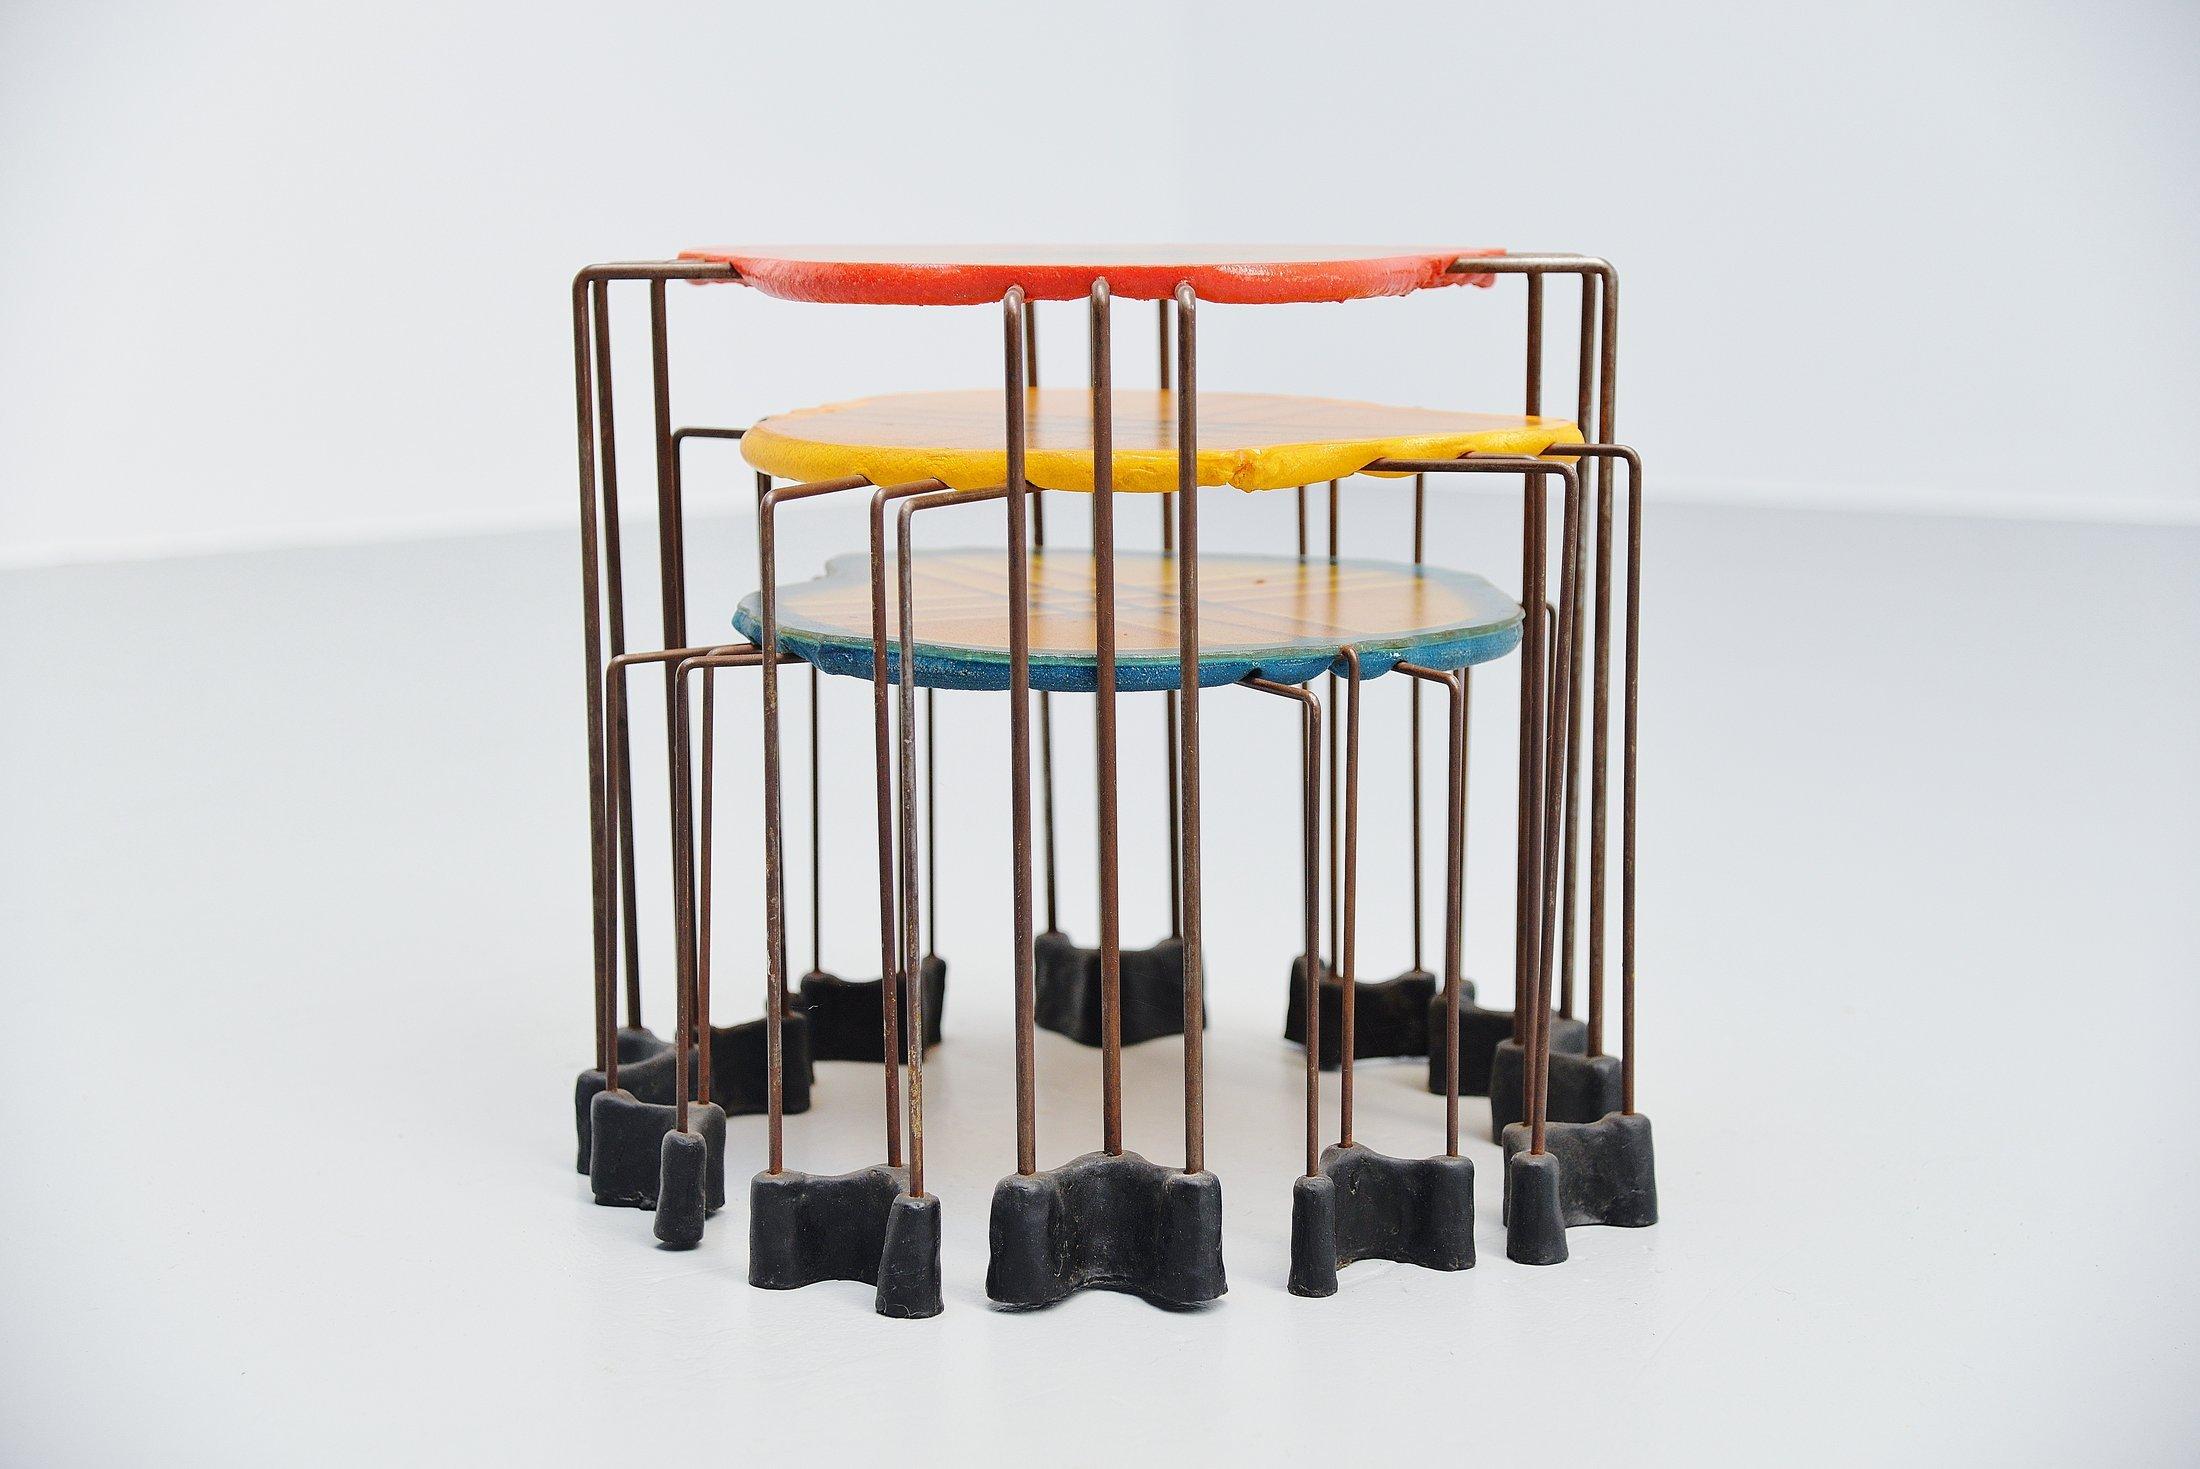 Very nice and early set of unique nesting tables designed by Gaetano Pesce and manufactured by Fish Design, Italy, circa 1990. These early tables are made of resin tops and feet and have metal structures. The tables have a nice patina from age, the